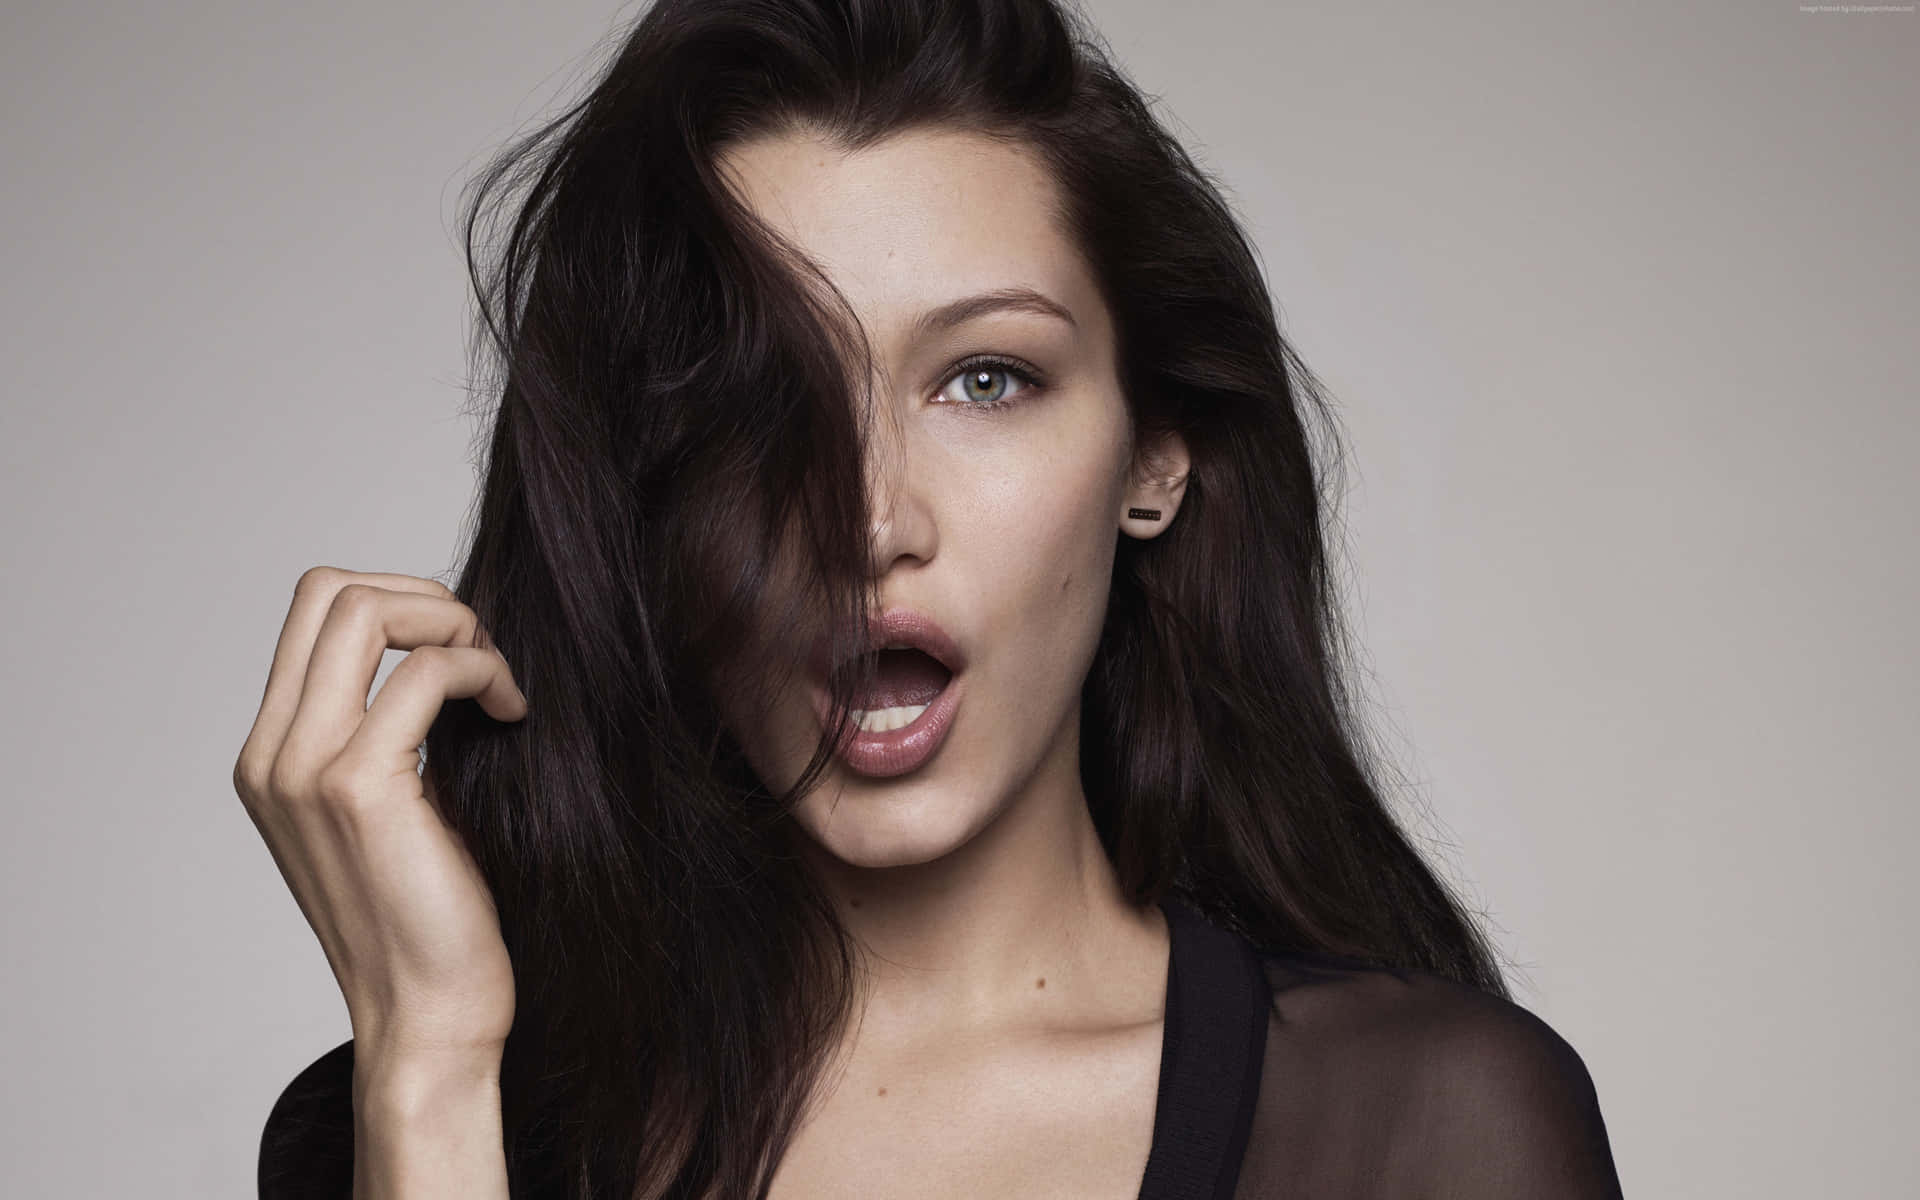 Model and television personality Bella Hadid strikes a pose.